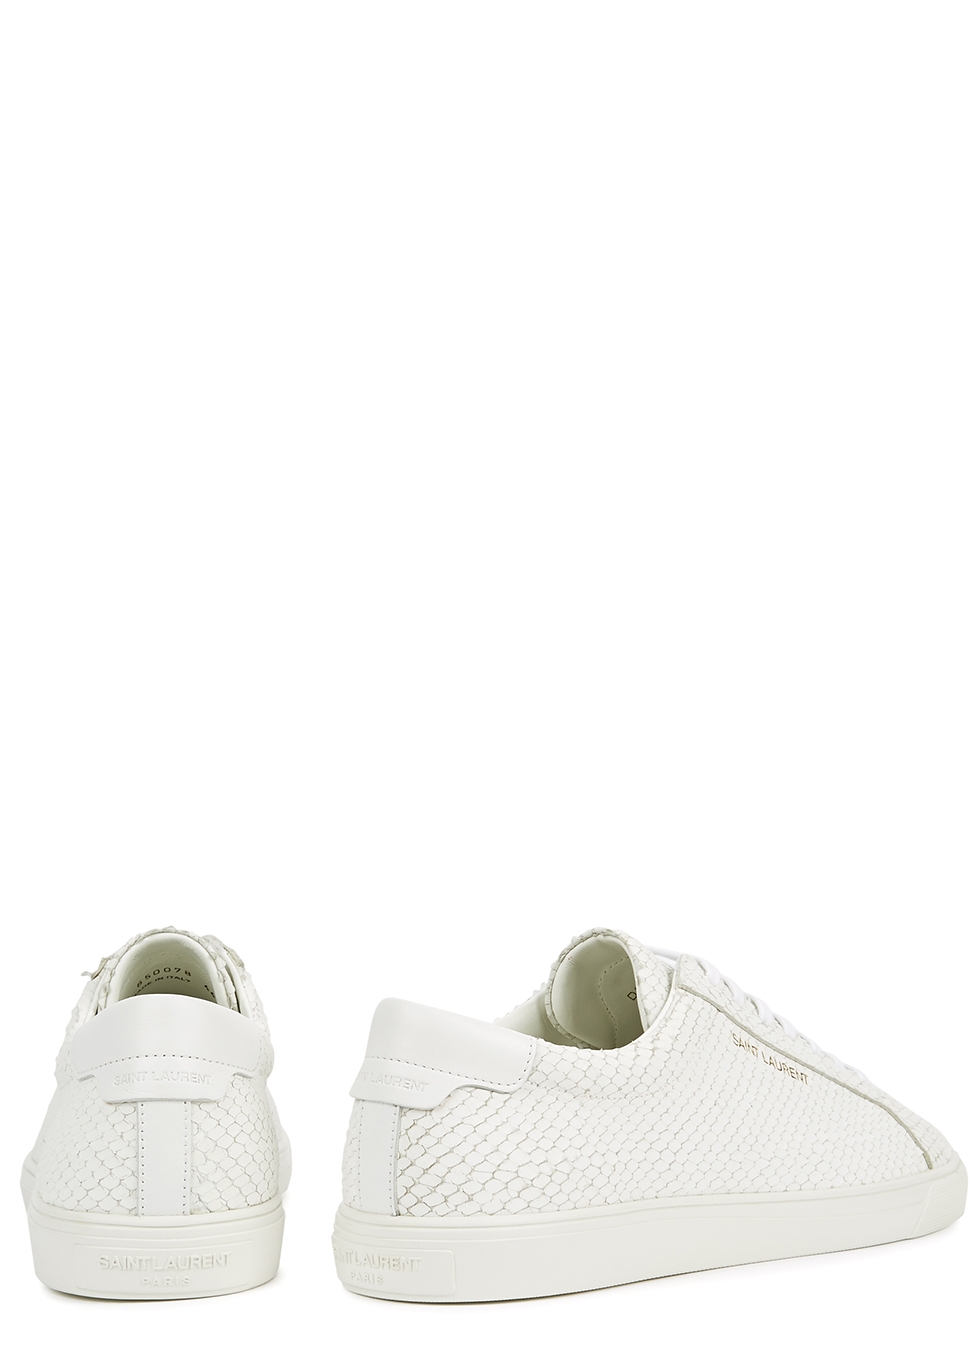 Saint Laurent Andy white python-effect leather sneakers - Harvey 